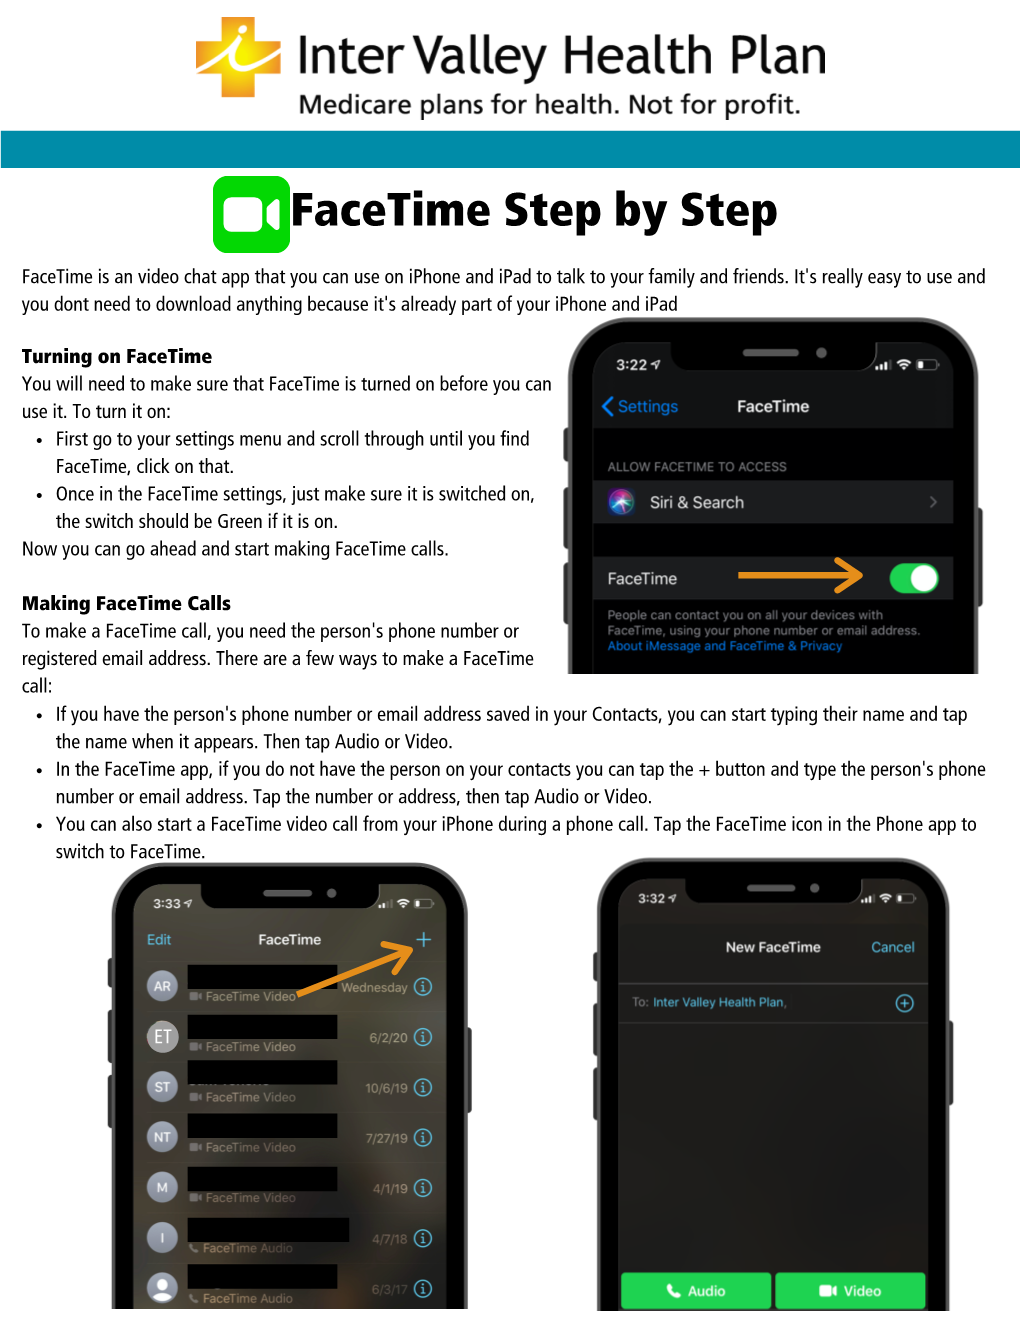 Facetime Step by Step